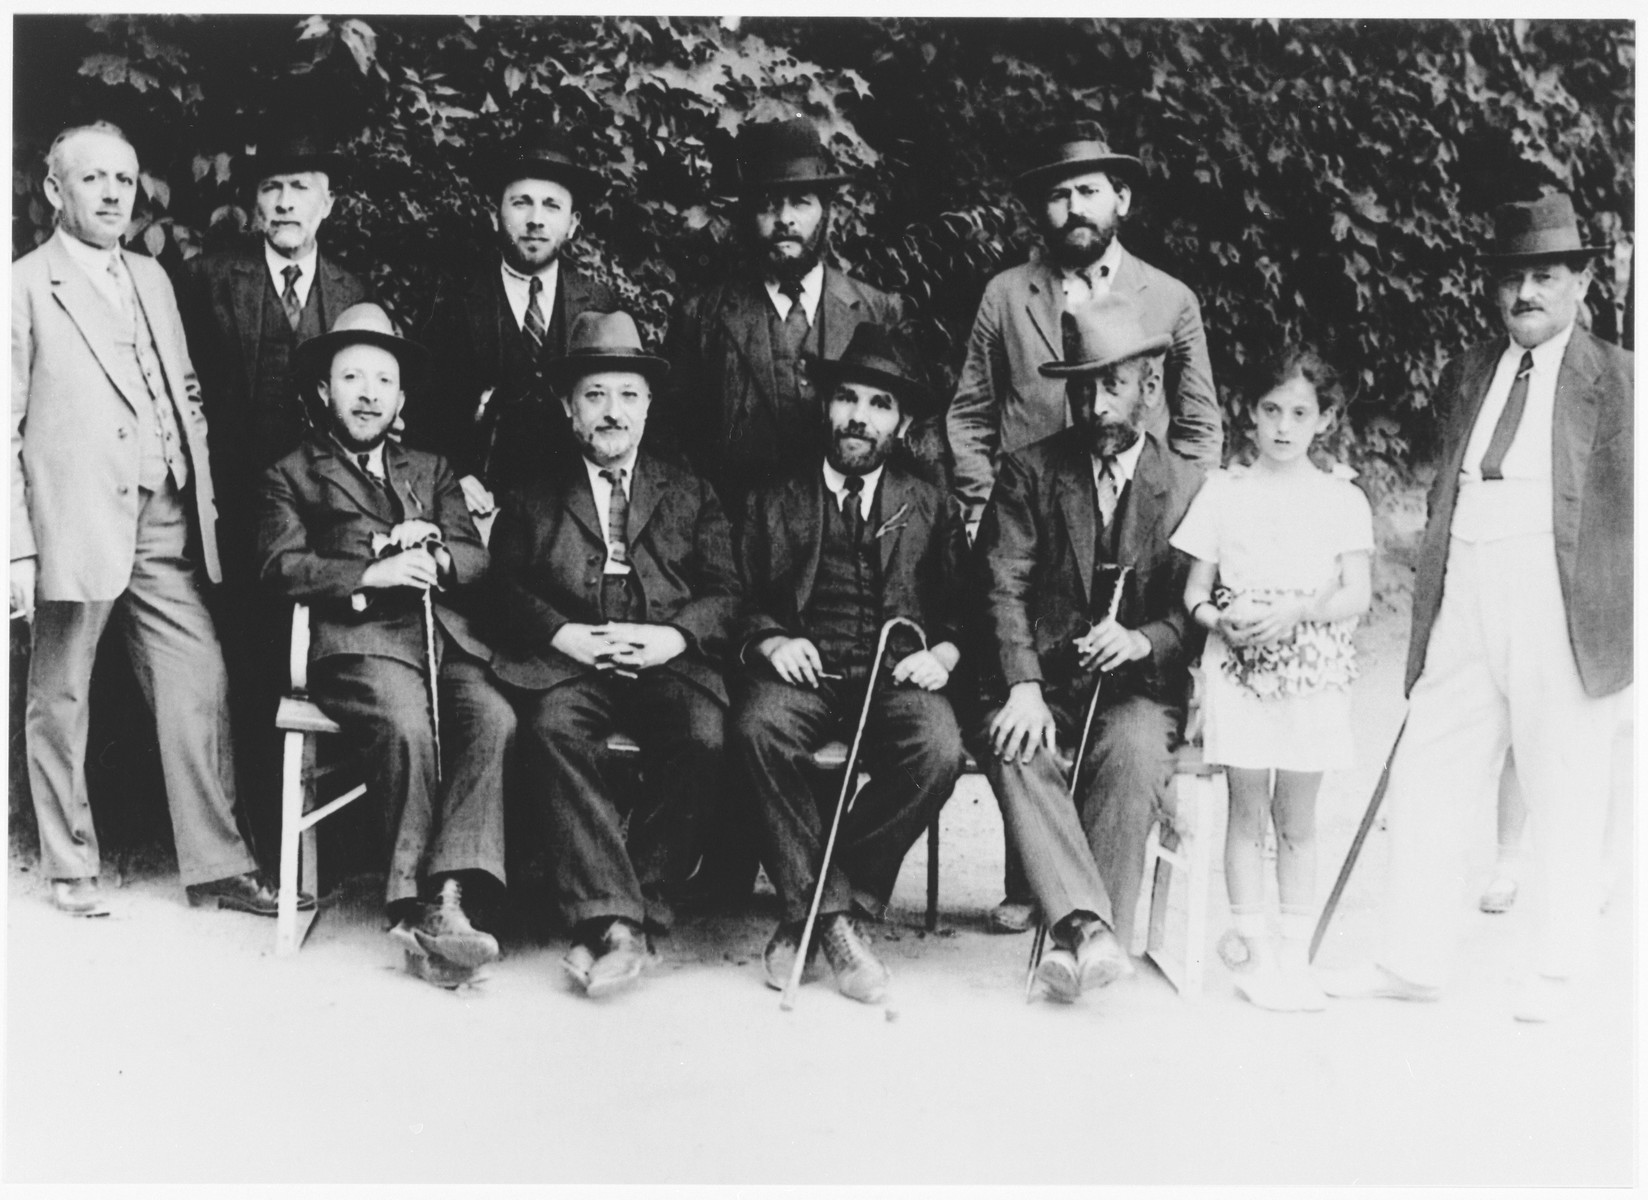 Leaders of the Sighet Jewish community.

Those pictured include Mr. Hershkovich (seated far left), Mr. Klein (seated second from left), Mr. Yacobovich (standing far right) and Mr. Jahan (standing second row, right).